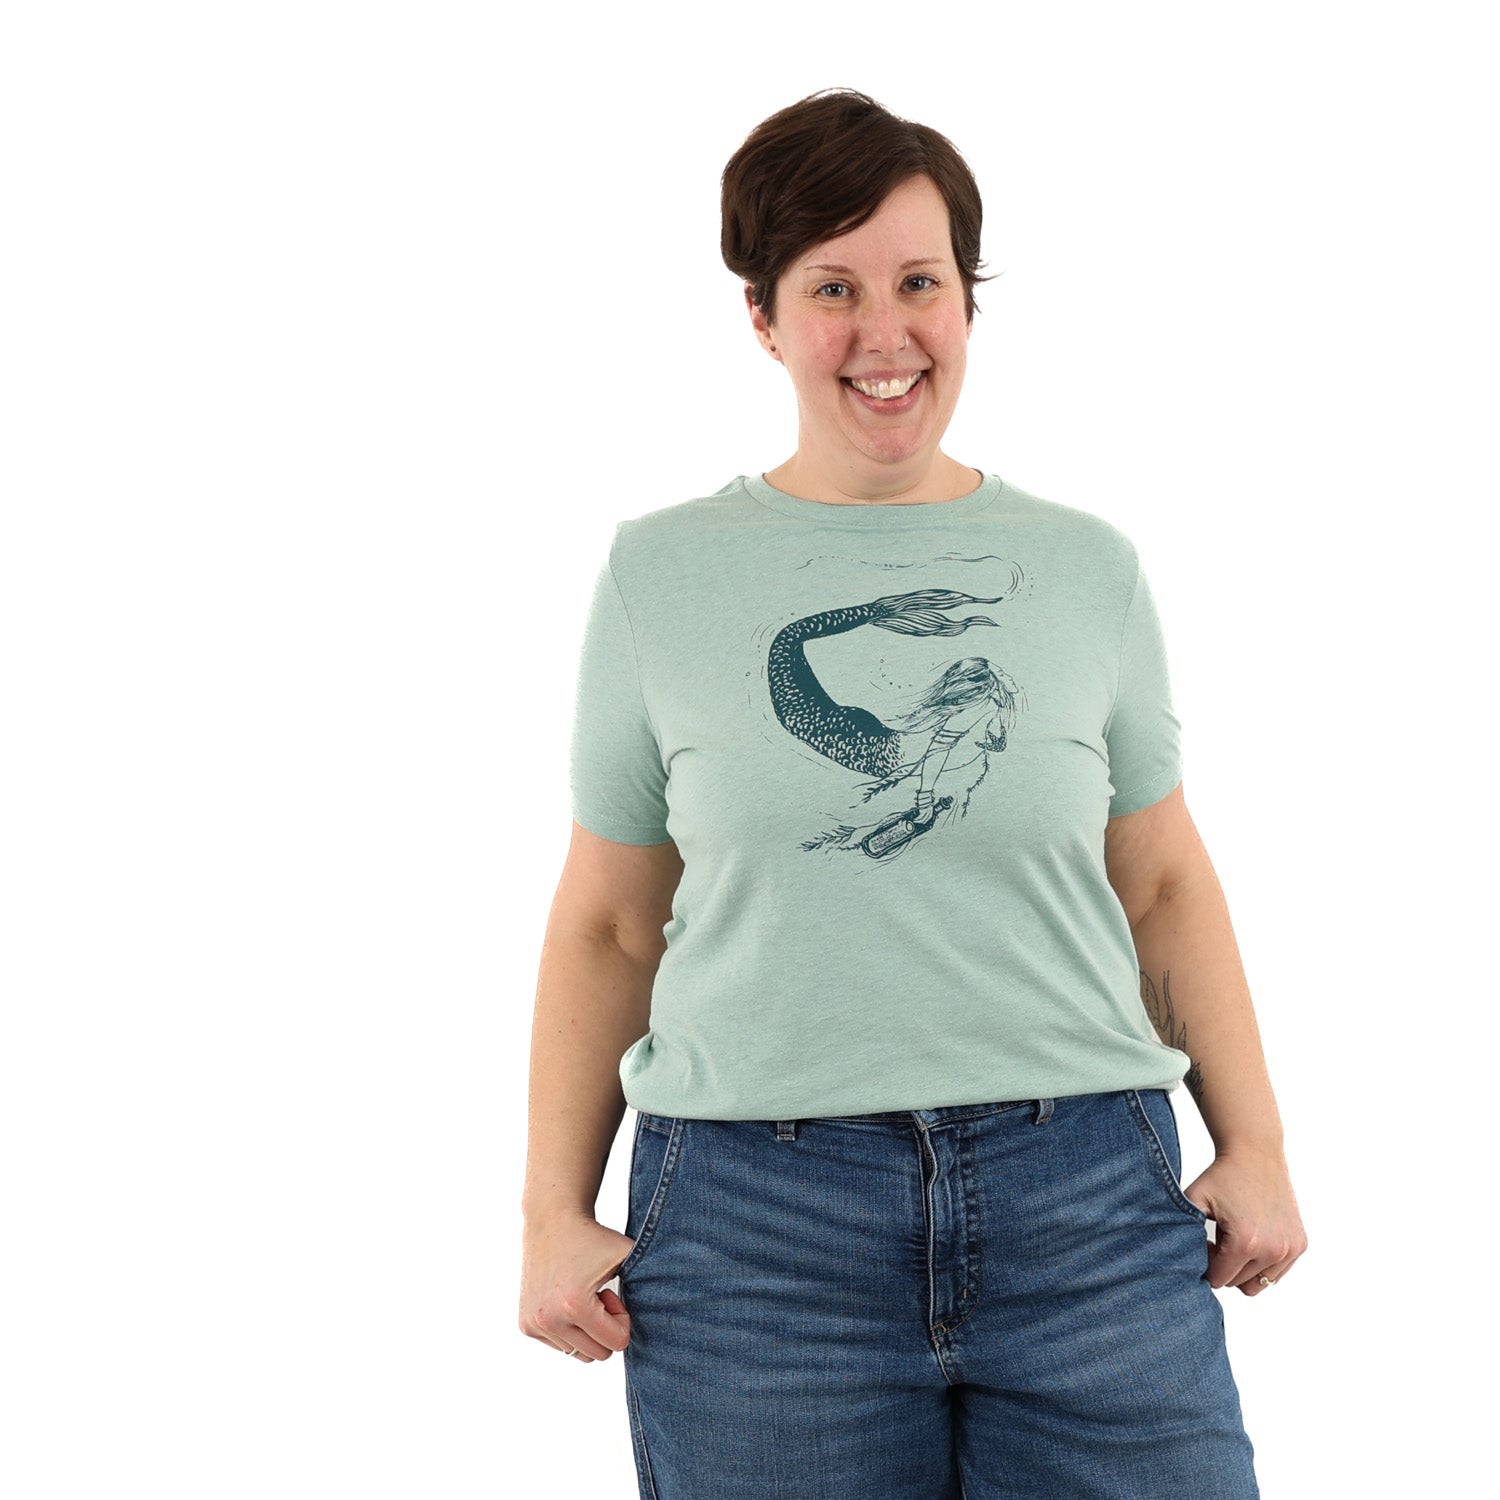 Woman wearing light green t shirt with a mermaid printed in green ink